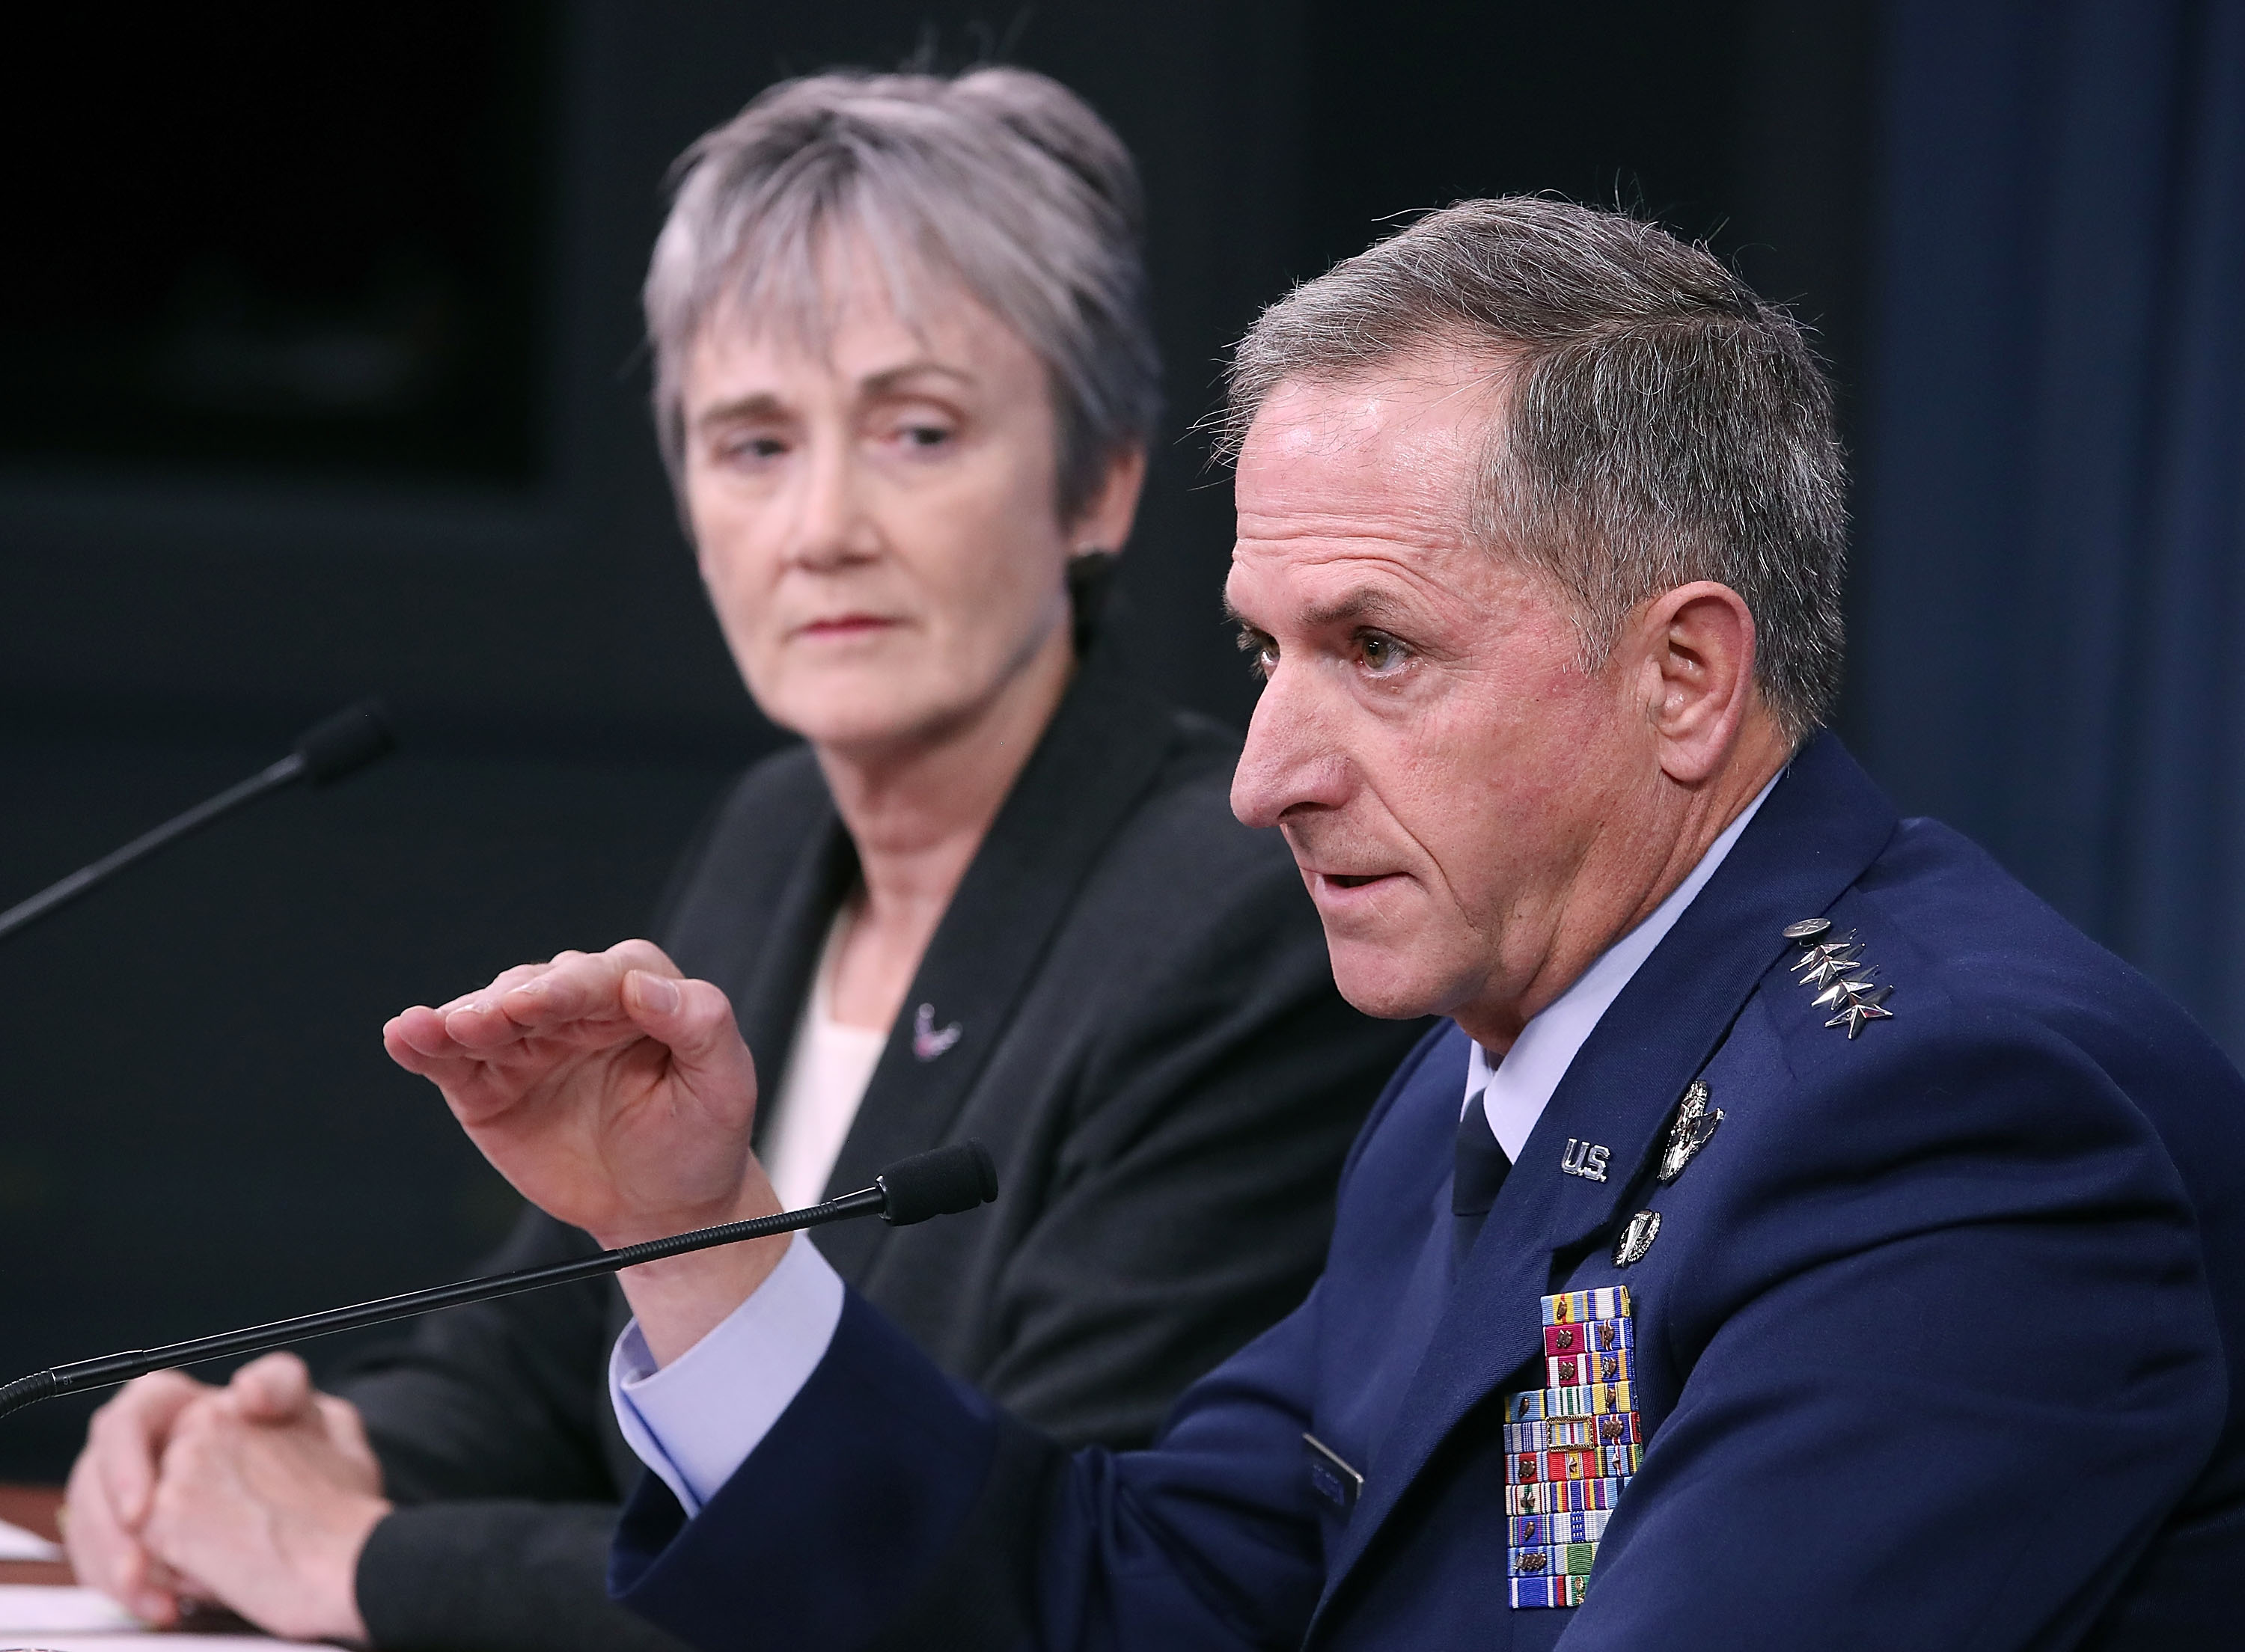 Air Force Secretary Heather Wilson and Air Force Chief of Staff Gen. David Goldfein brief the media on the state of the Air Force and the situation with Texas Church shooter Devin Kelley, at the Pentagon on November 9, 2017 in Arlington, Virginia. (Photo by Mark Wilson/Getty Images)